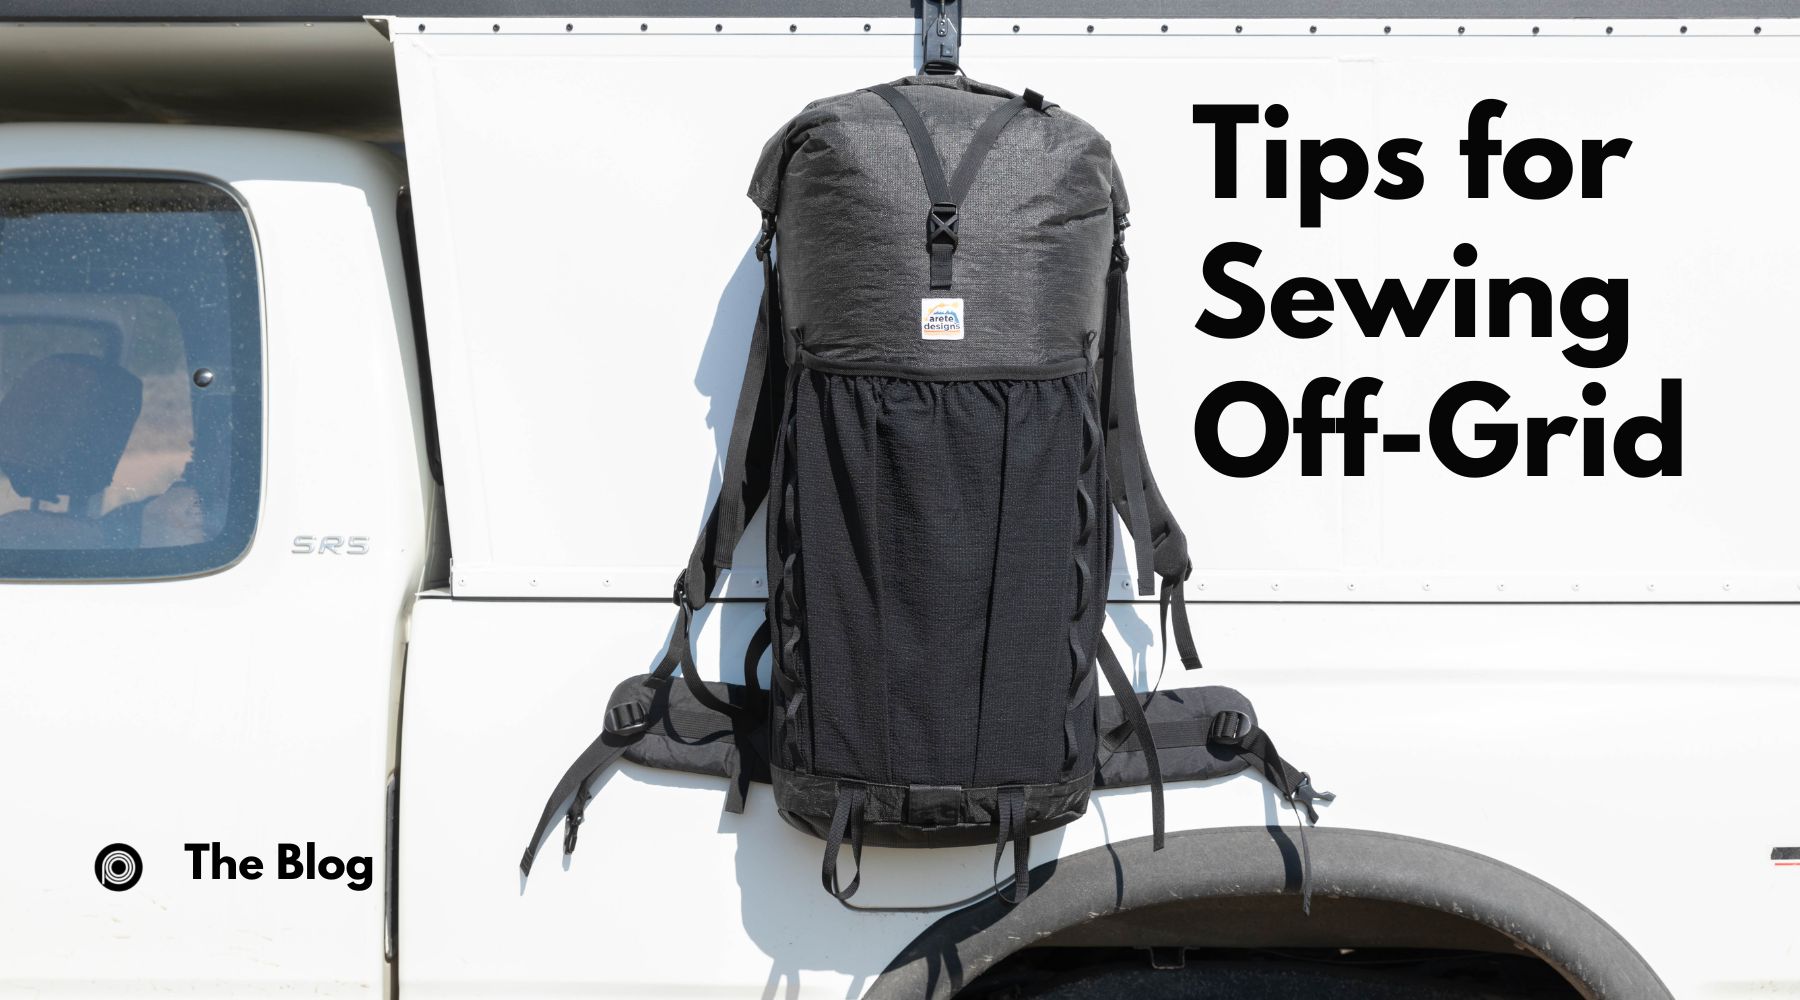 Tips for Sewing Off-Grid